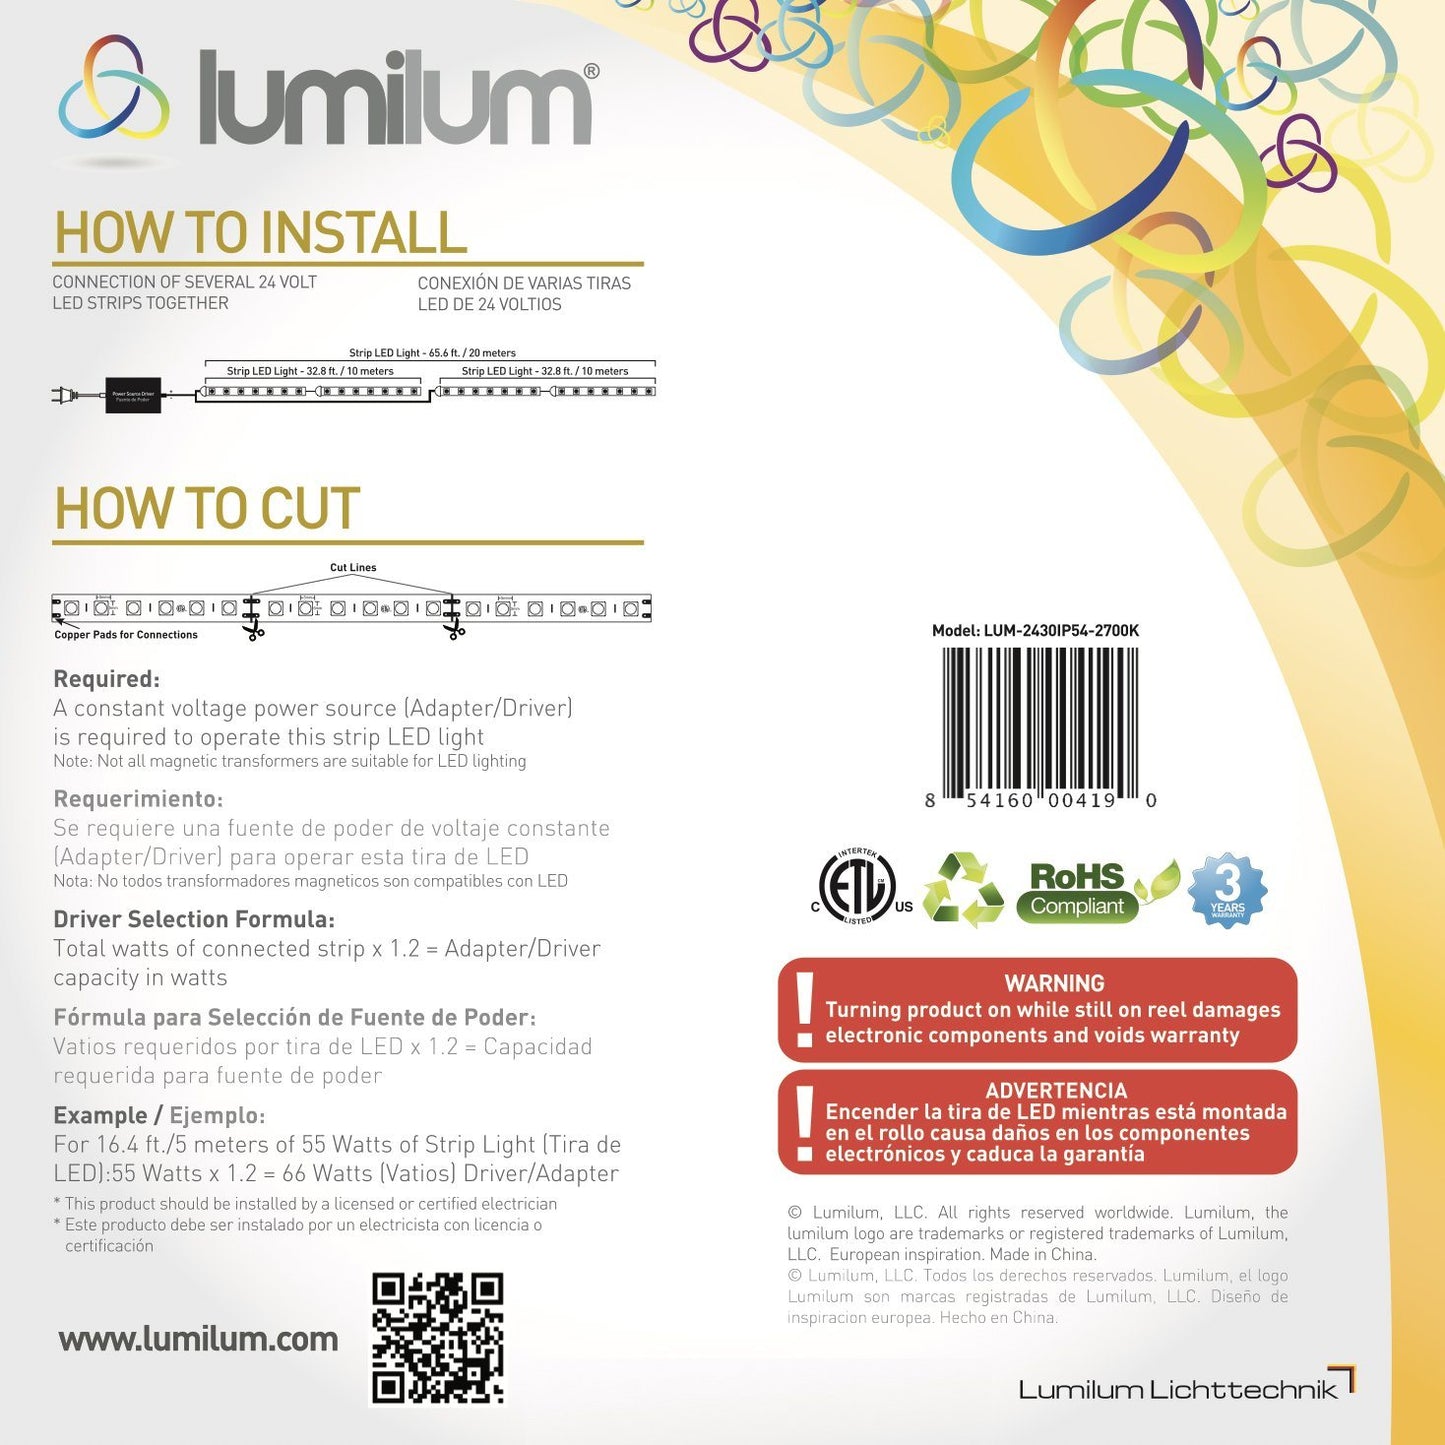 lumilum brand yellow led strip light packaging backside with product information text on how to install and cut